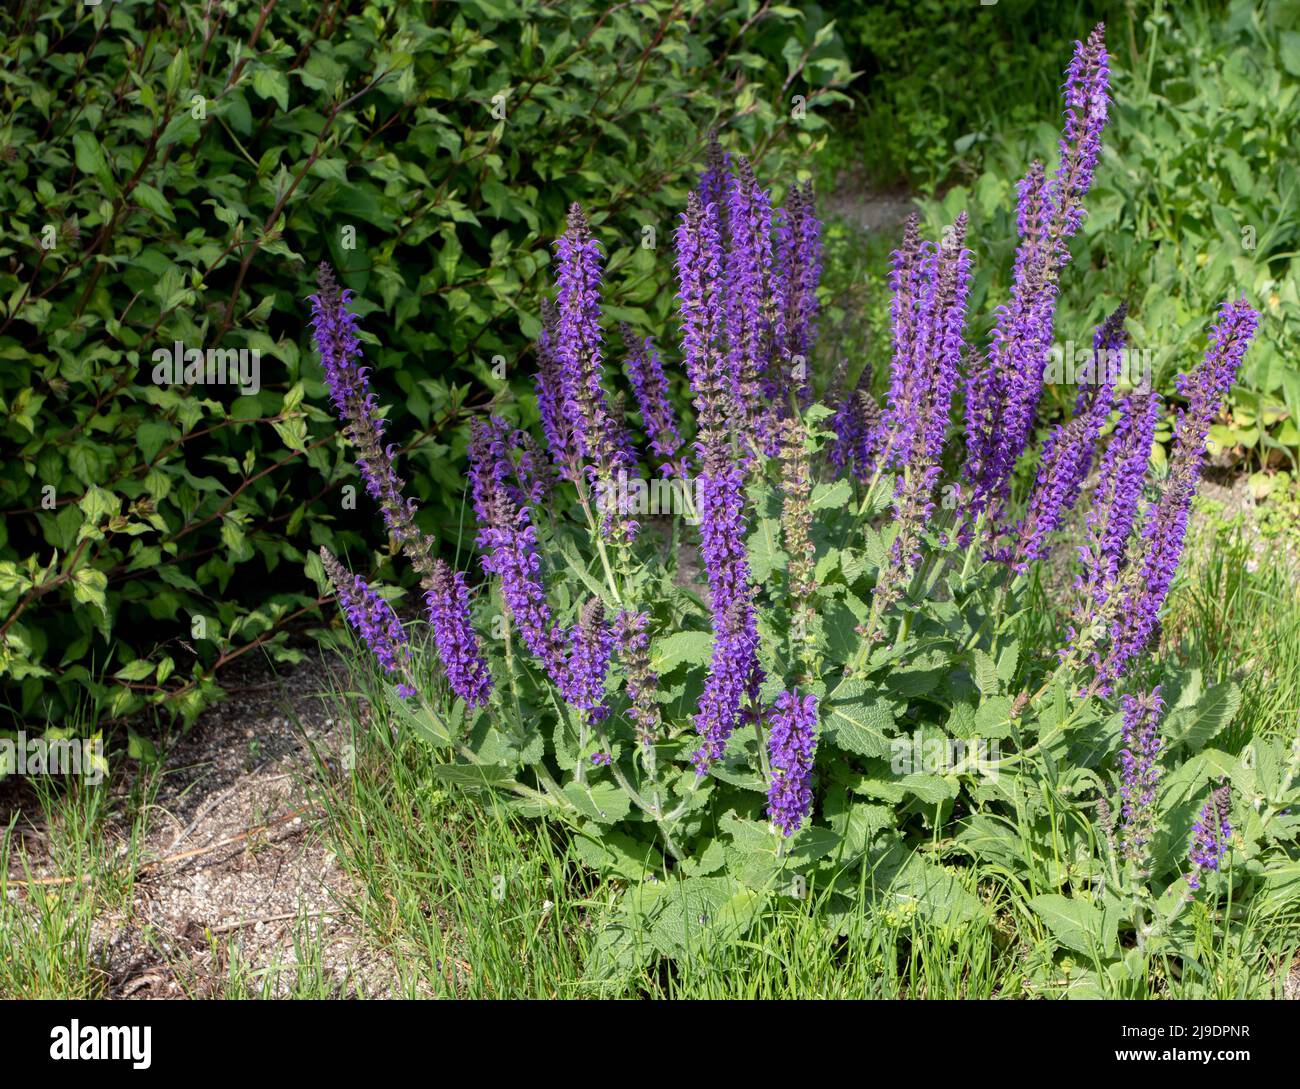 Salvia sylvestris or wood sage plant with spikes of purple blue flowers. Stock Photo